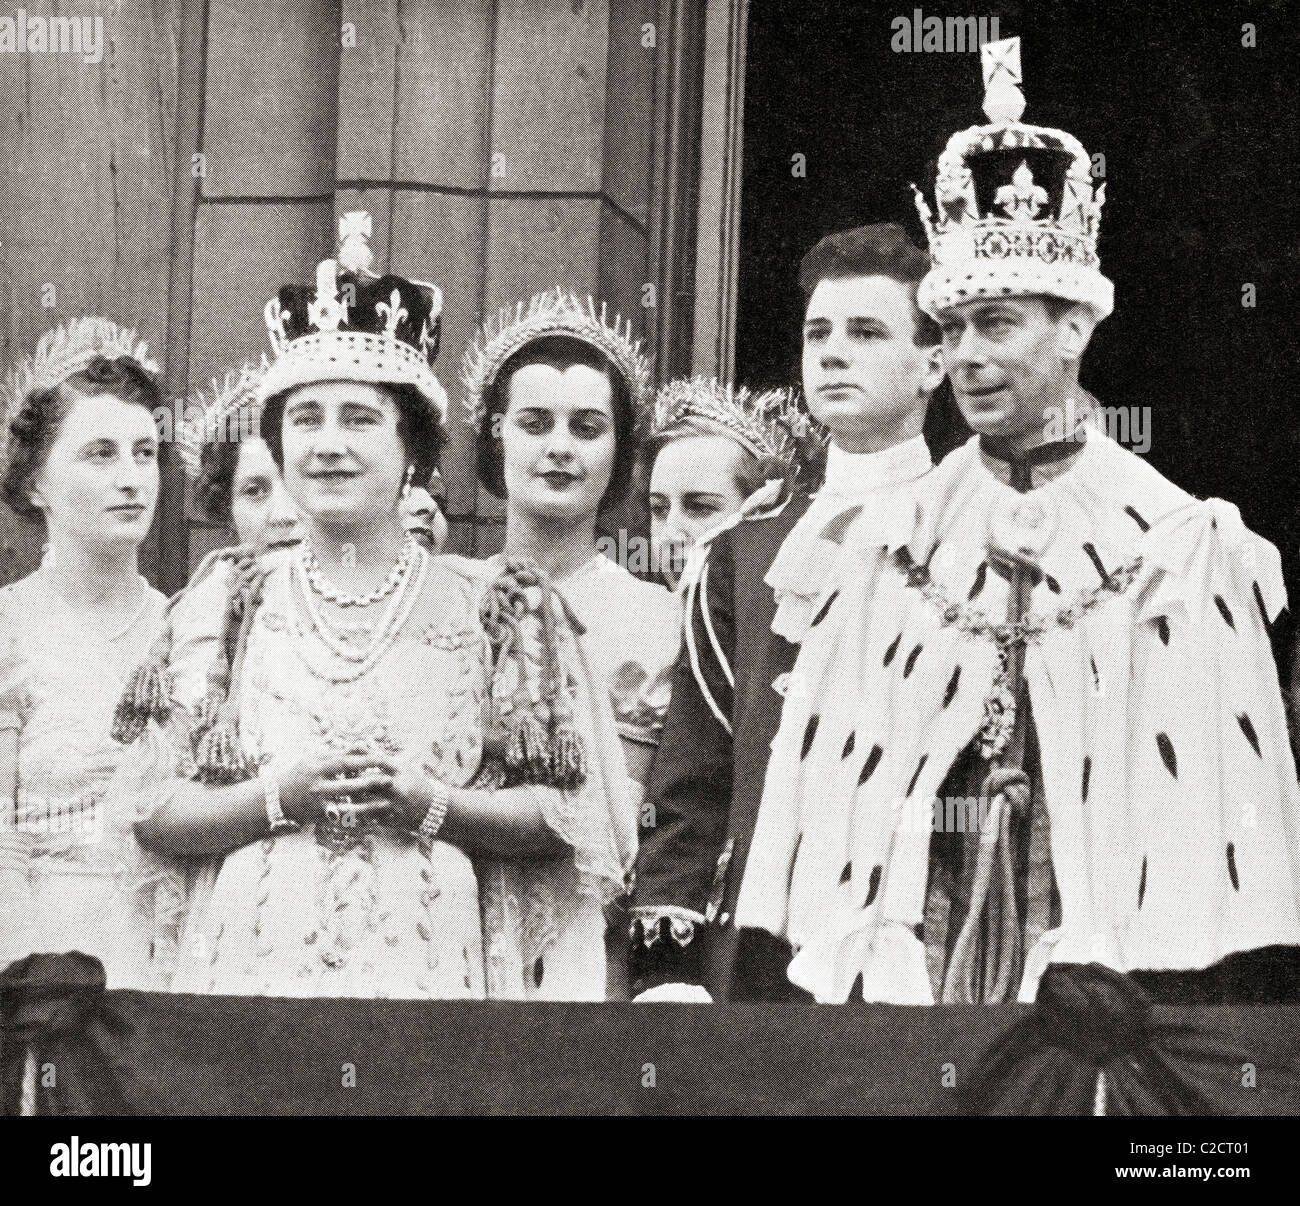 King George VI and Queen Elizabeth on the balcony at Buckingham Palace after their coronation in 1937. Stock Photo